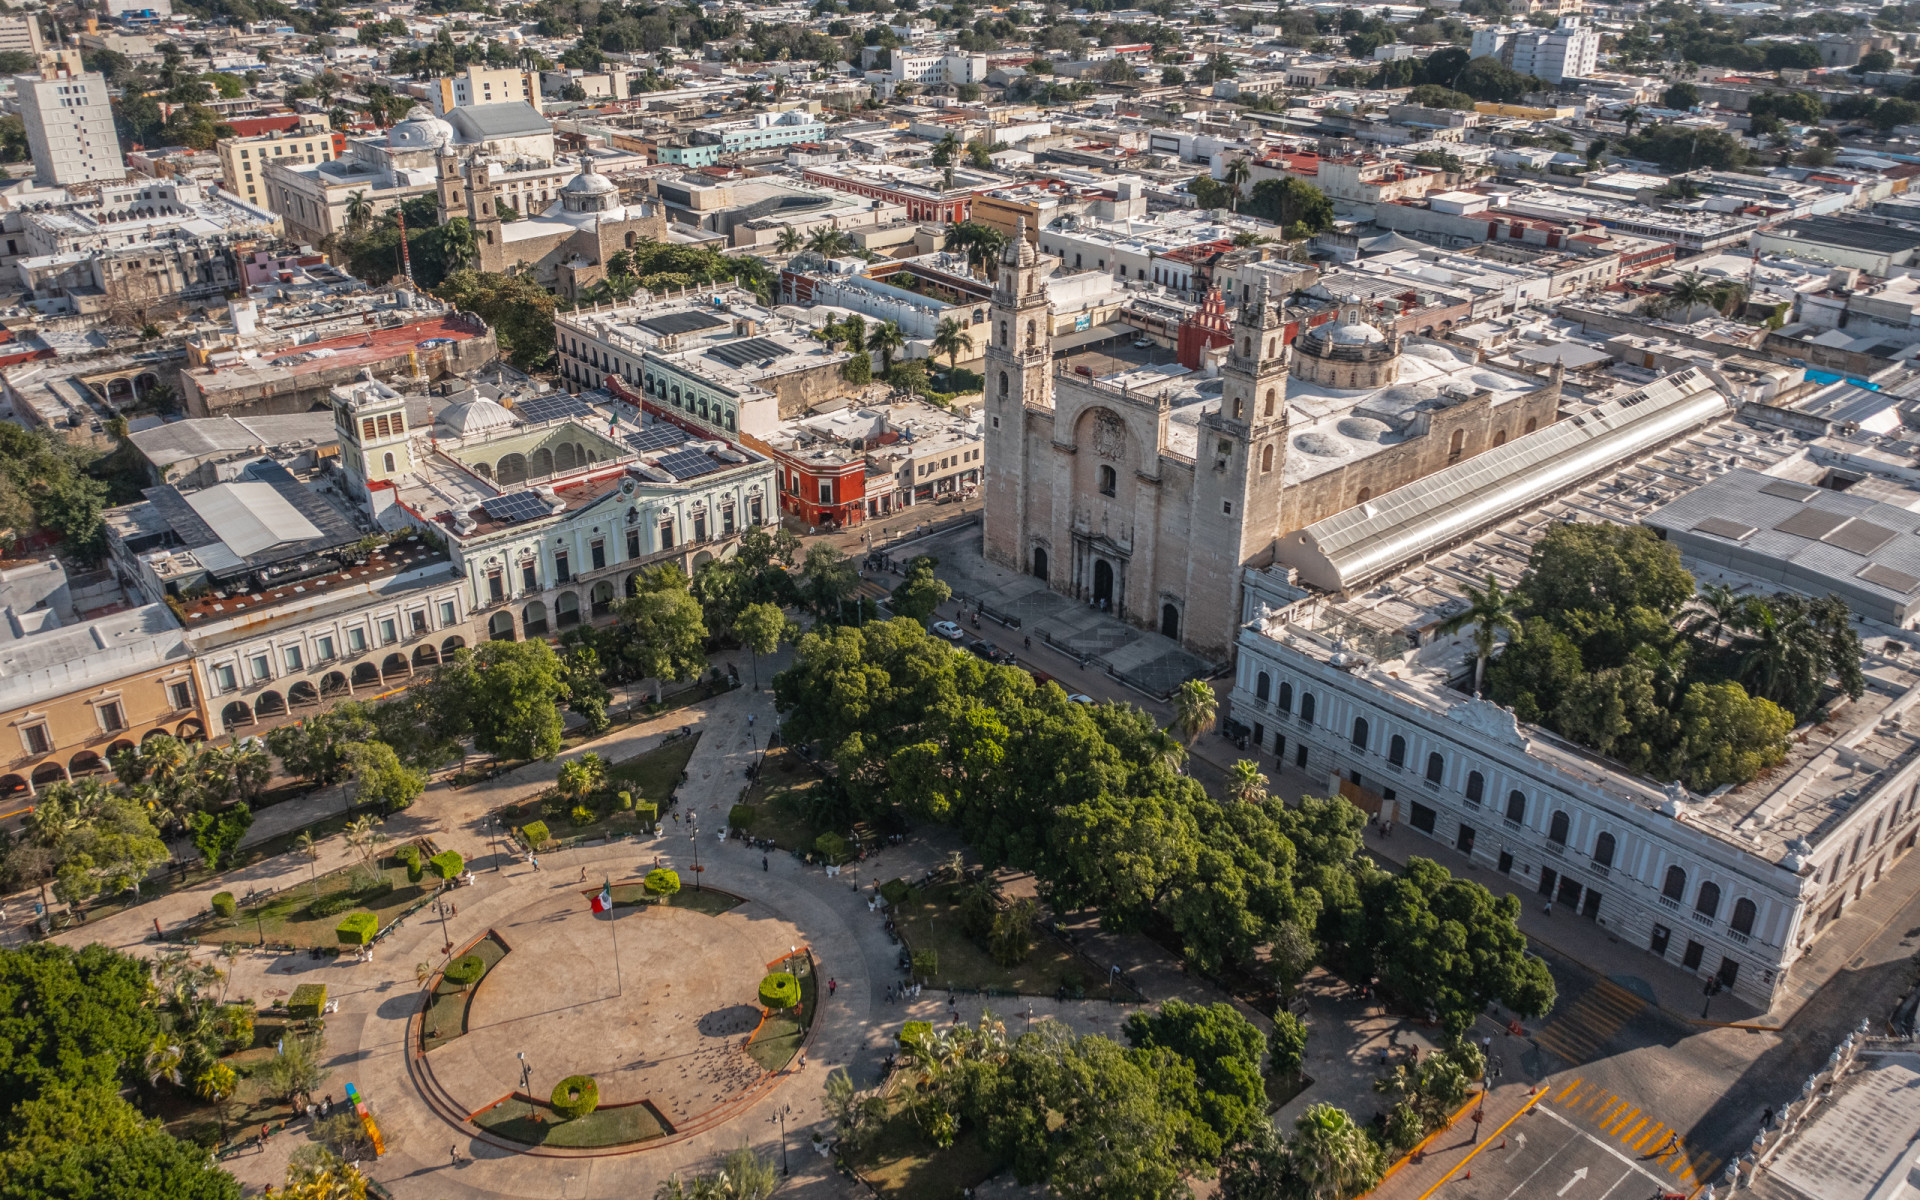 <p>Mérida, the vibrant capital of the Mexican state of Yucatán, has a rich Mayan and colonial heritage. A former American Capital of Culture, the city contrasts this historic canvas with a wealth of designer boutique hotels and noted culinary hotspots.</p><p>You may also like:<a href="https://www.starsinsider.com/n/341350?utm_source=msn.com&utm_medium=display&utm_campaign=referral_description&utm_content=636762en-en_selected"> Daily habits that might be harming your brain</a></p>